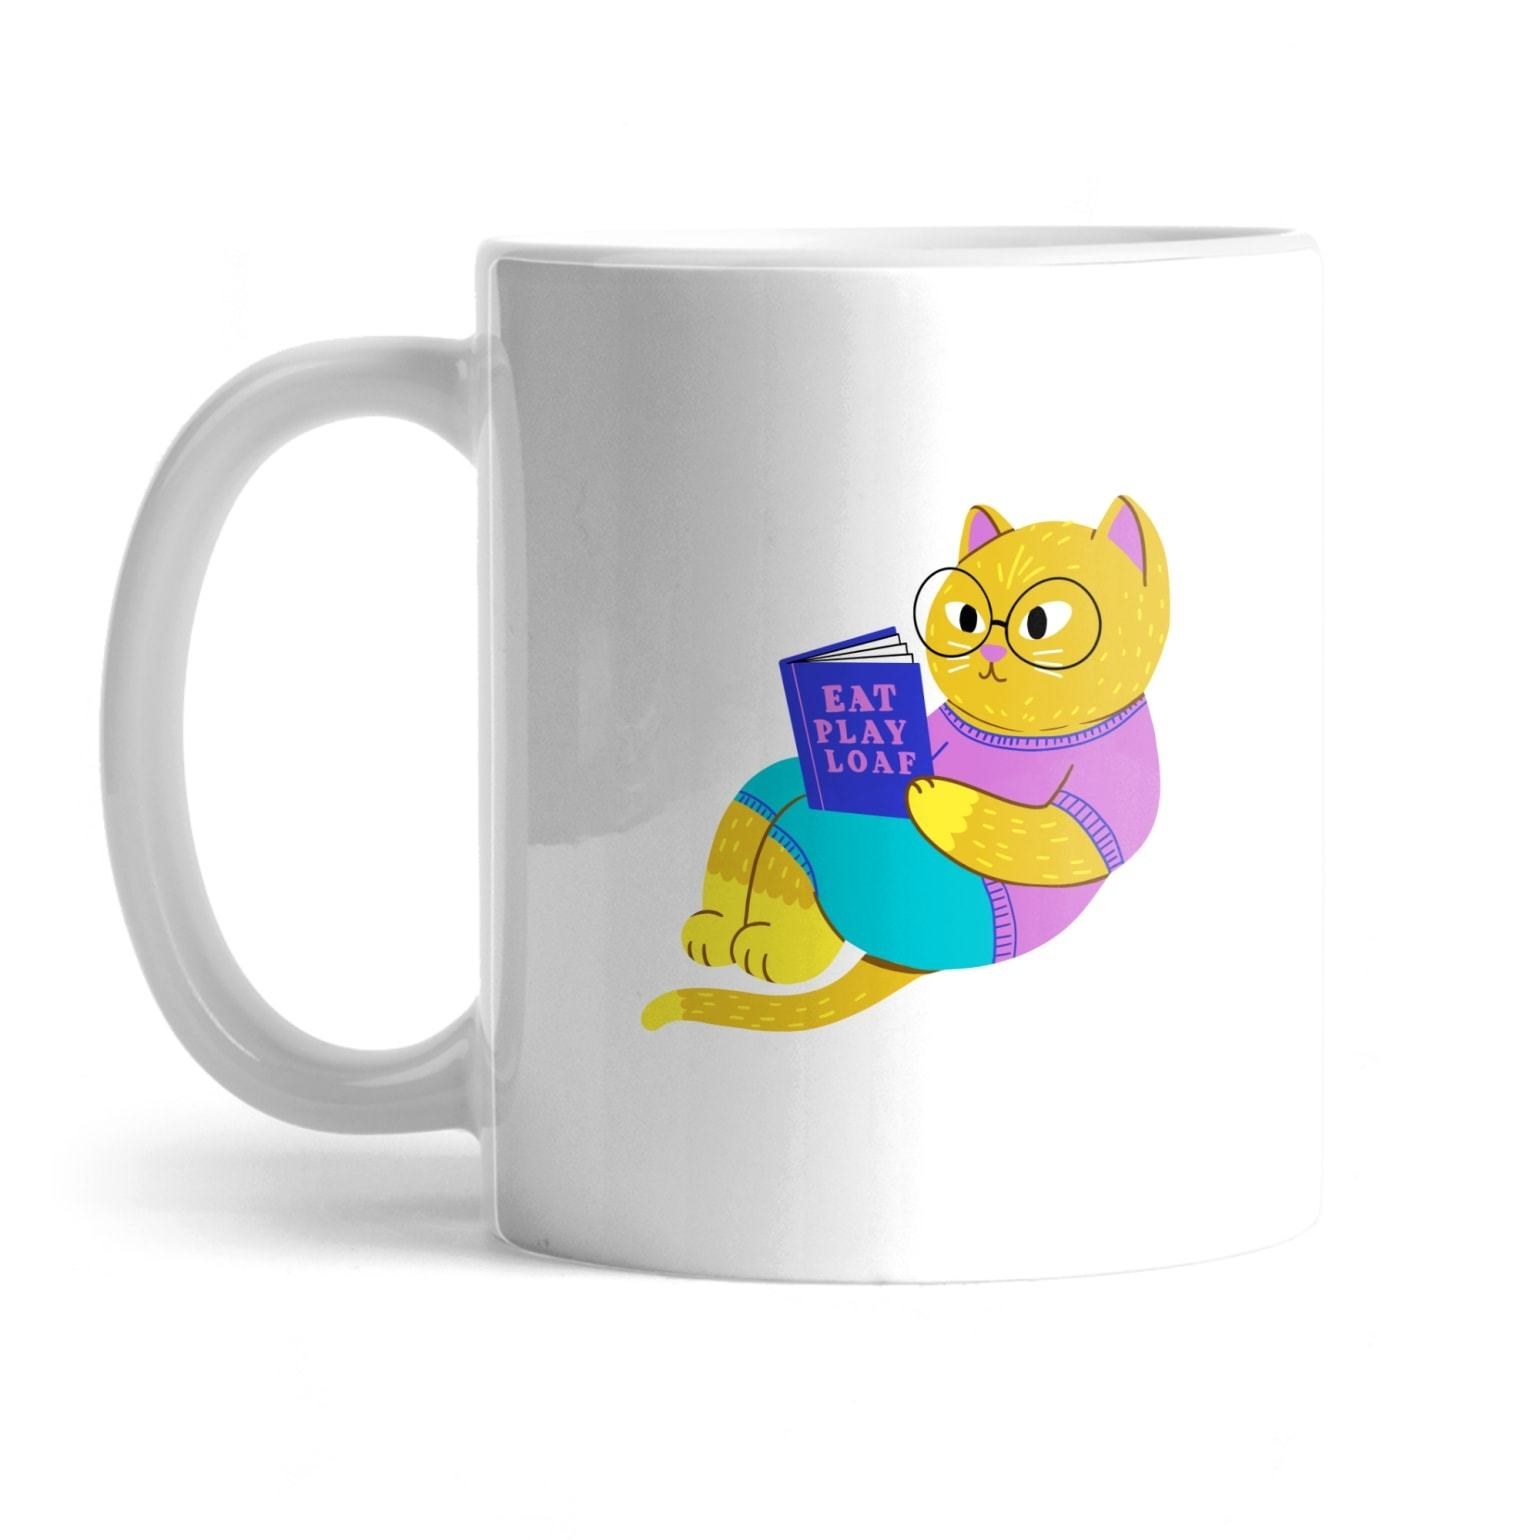 whit mug with a yellow cat wearing glasses and reading a book called &quot;eat play loaf&quot;